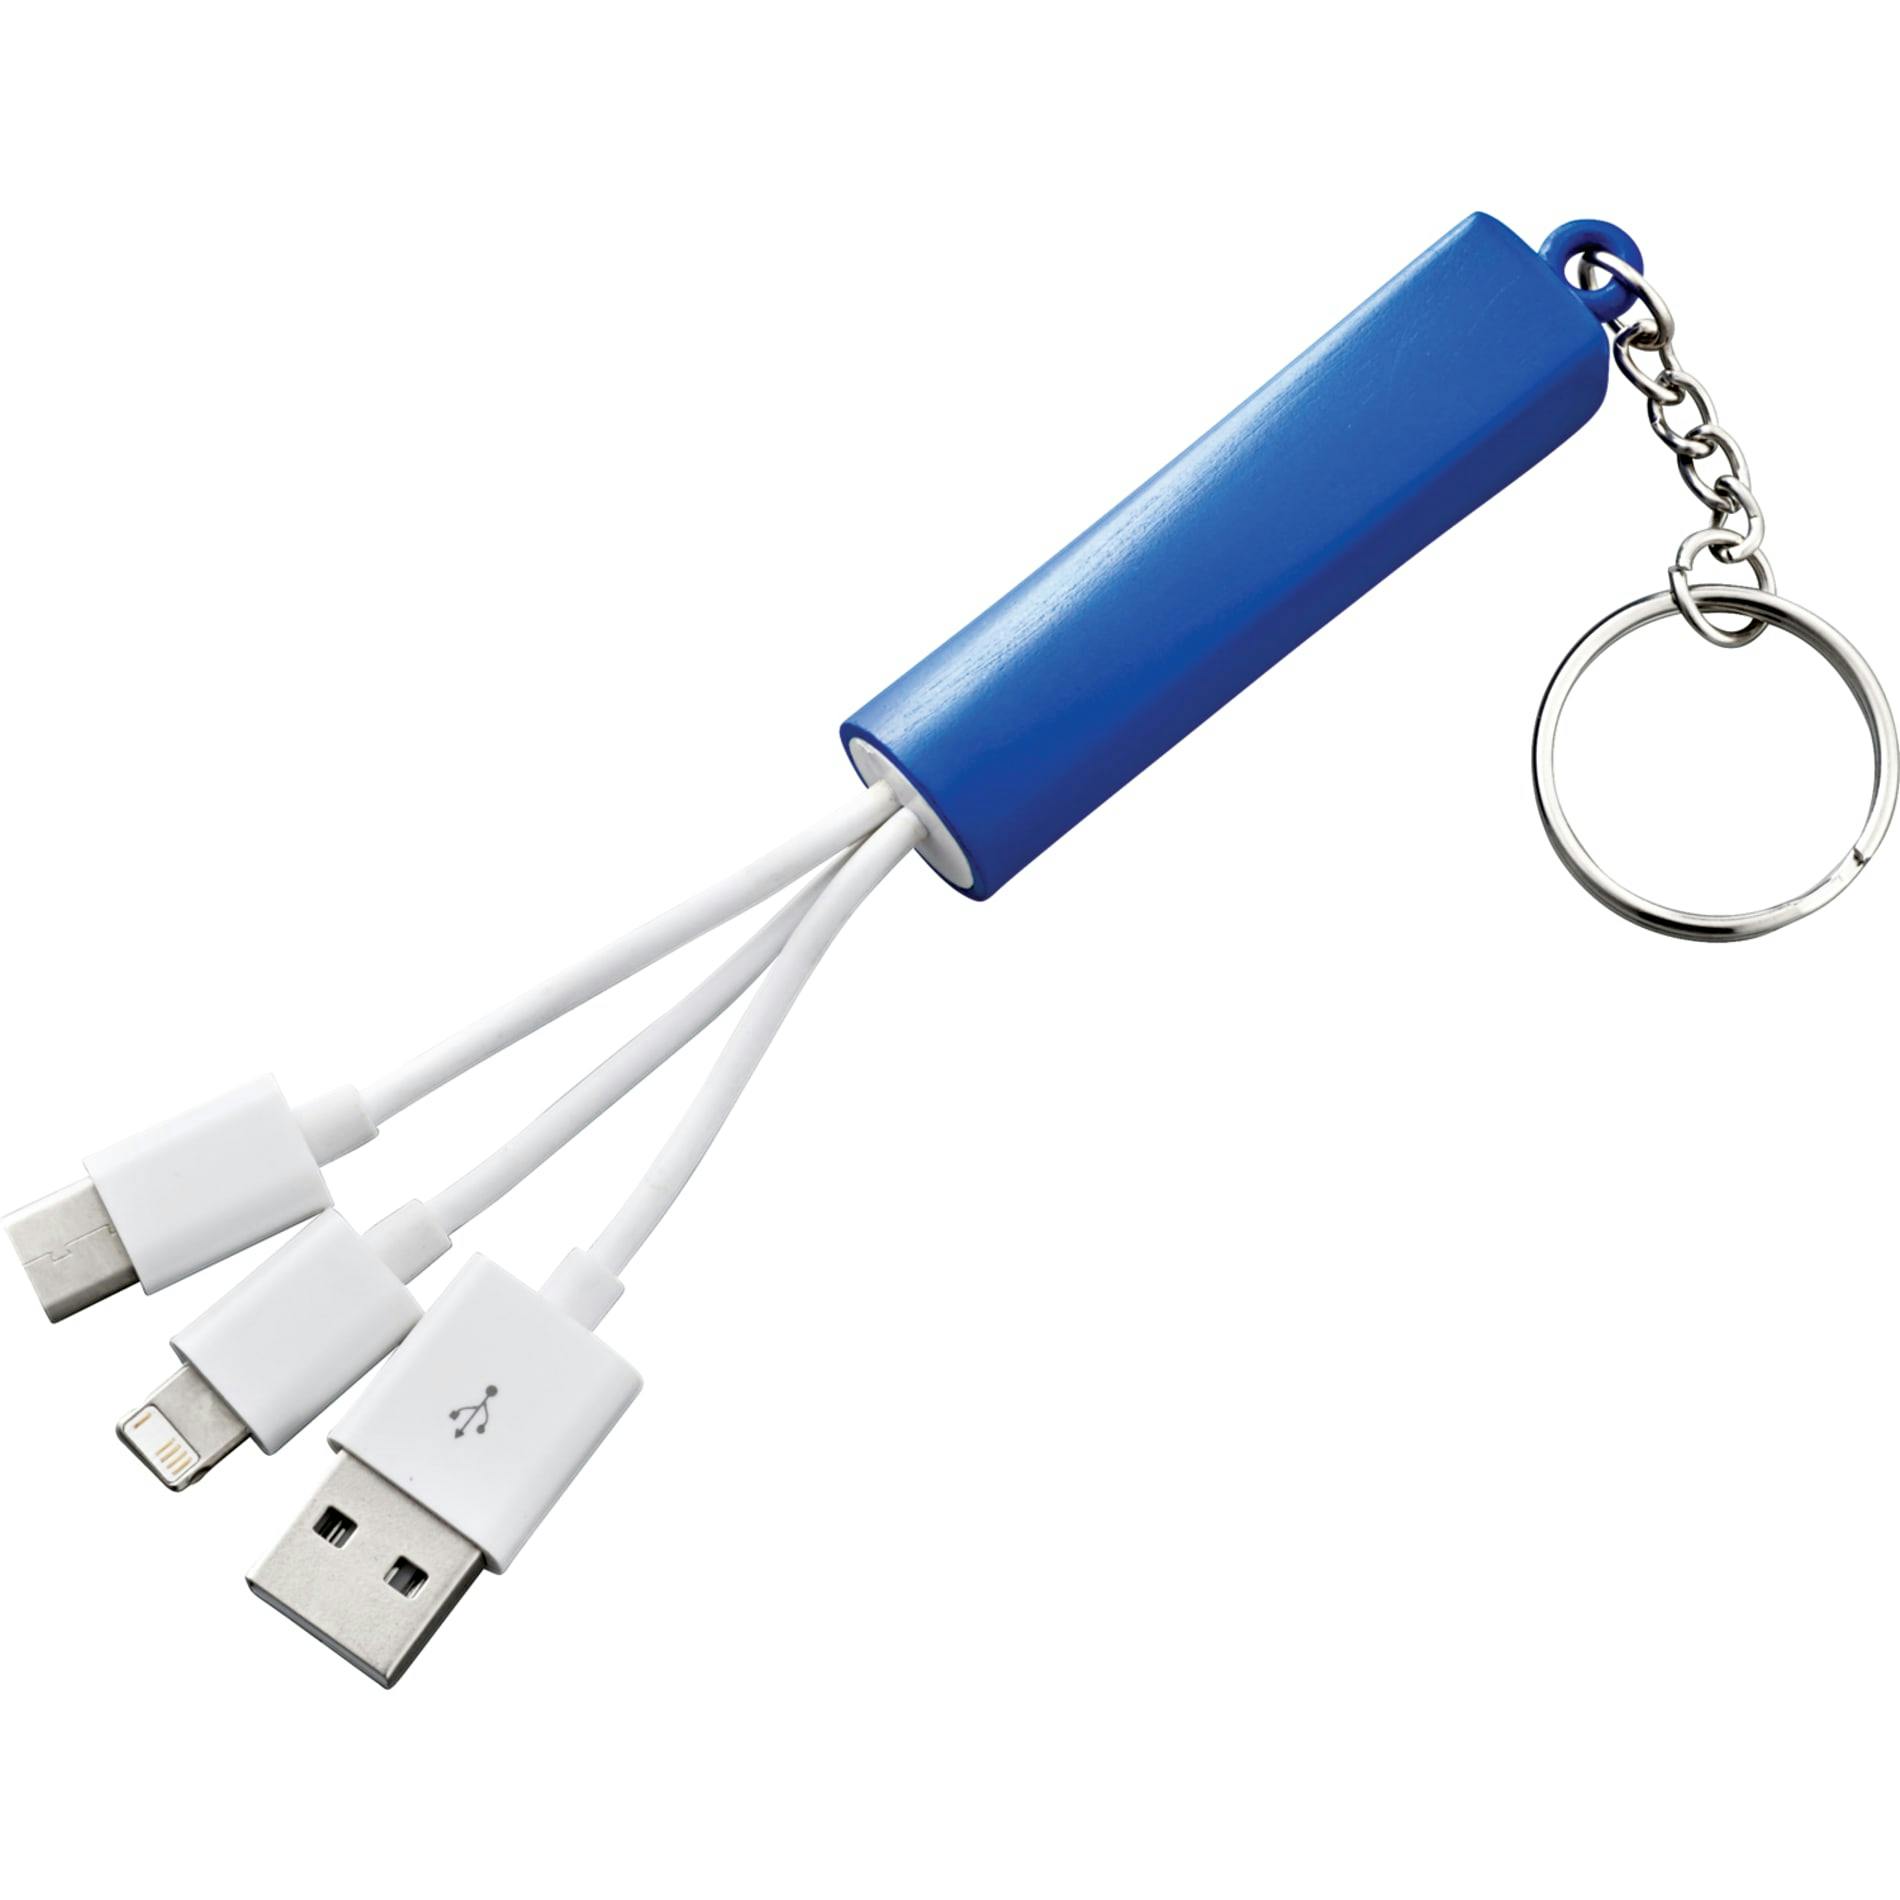 Route Light Up Logo 3-in-1 Cable - additional Image 1